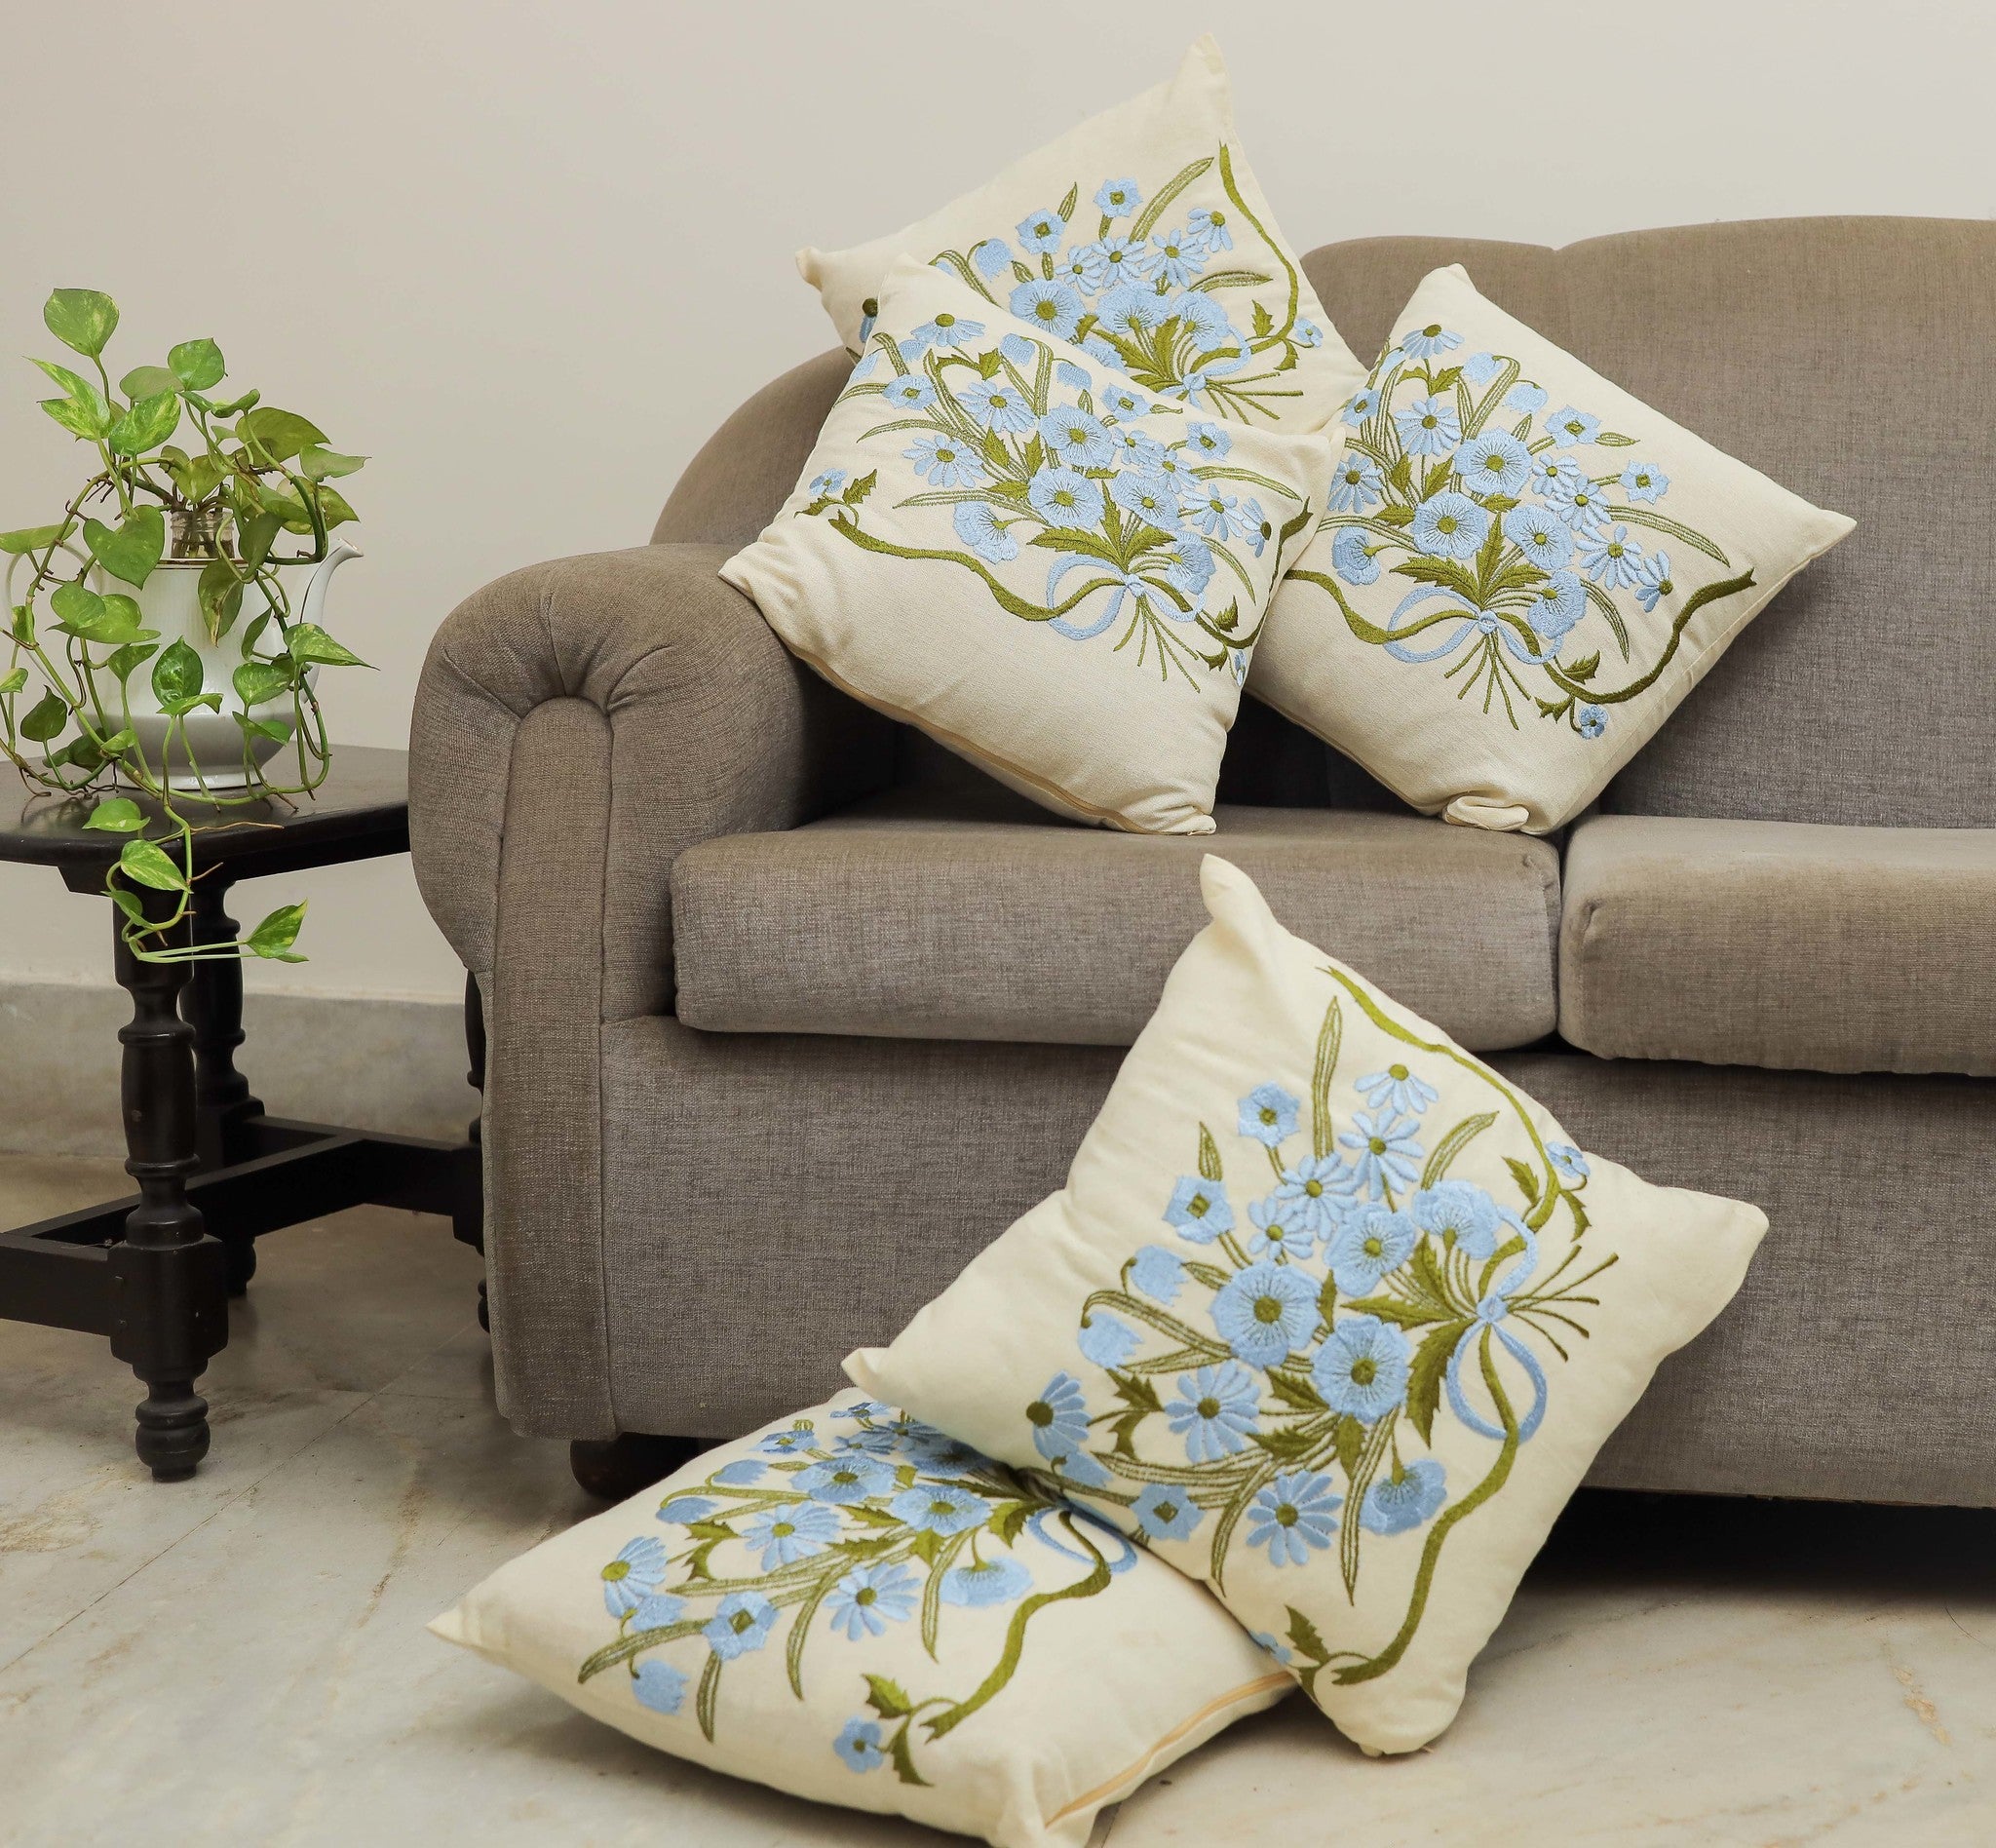 Set of 5: Floral Blue Embroidered Cushions